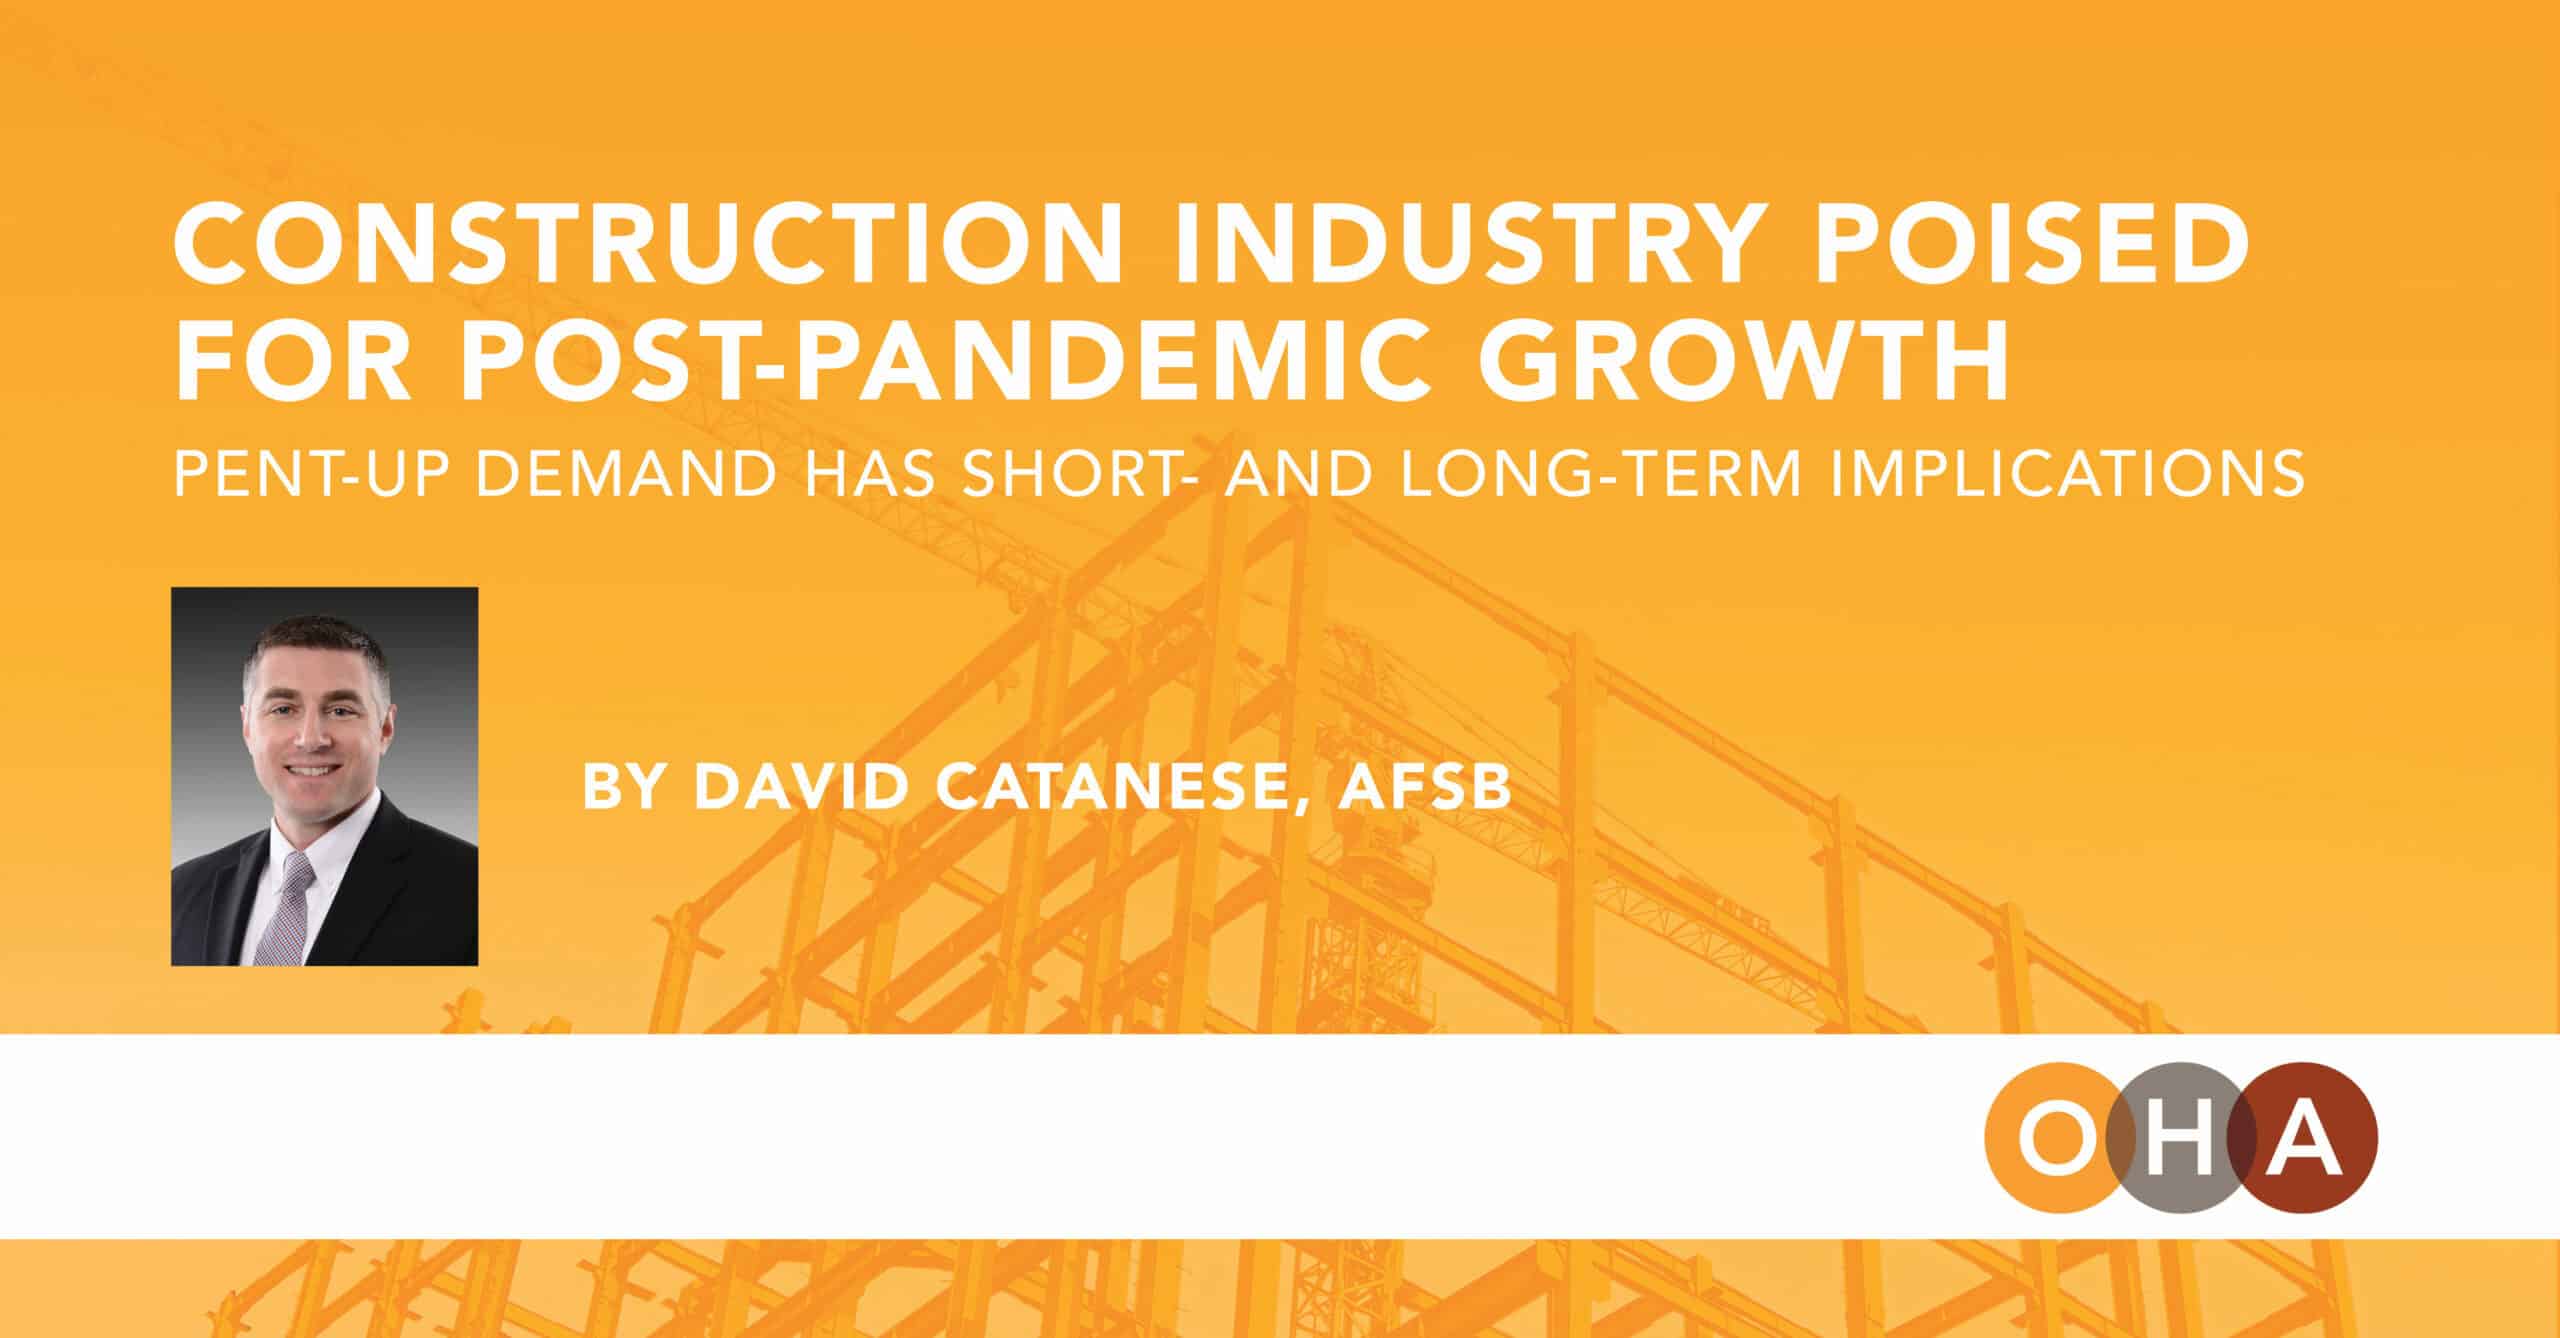 Can the Construction Industry Be Disrupted?